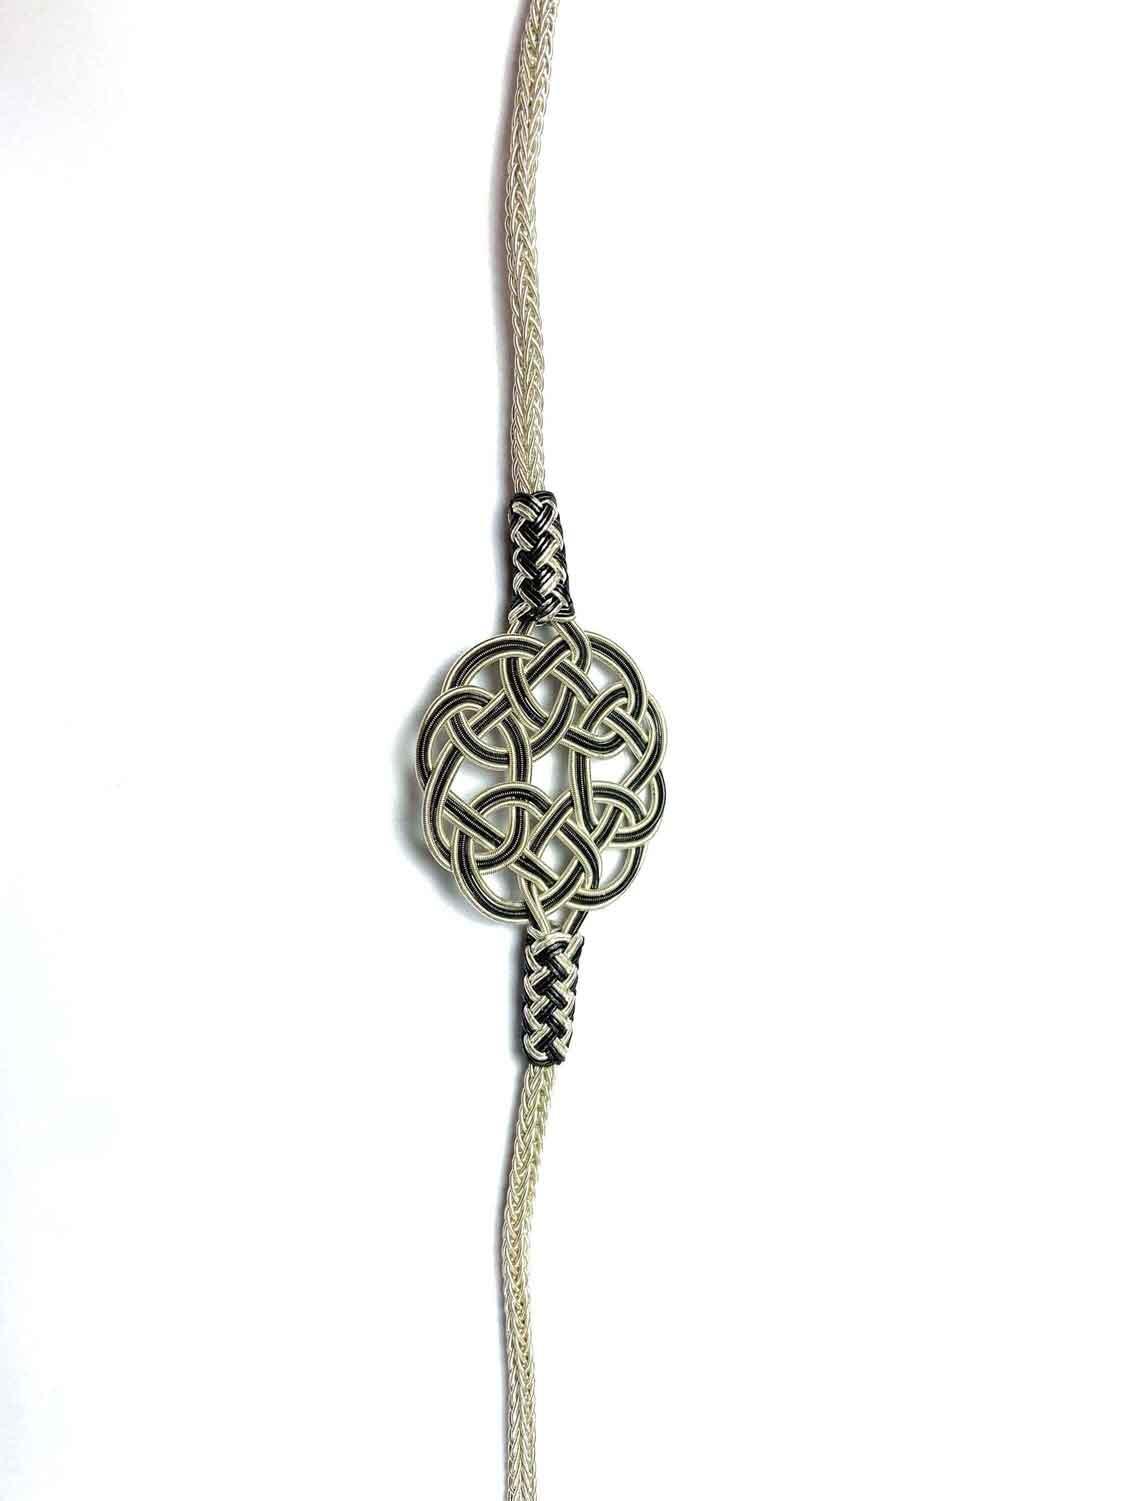 Delicate Celtic Knot Braided Bracelet - Elegant Handcrafted Silver Accessory Wonderful Gift available at Moyoni Design